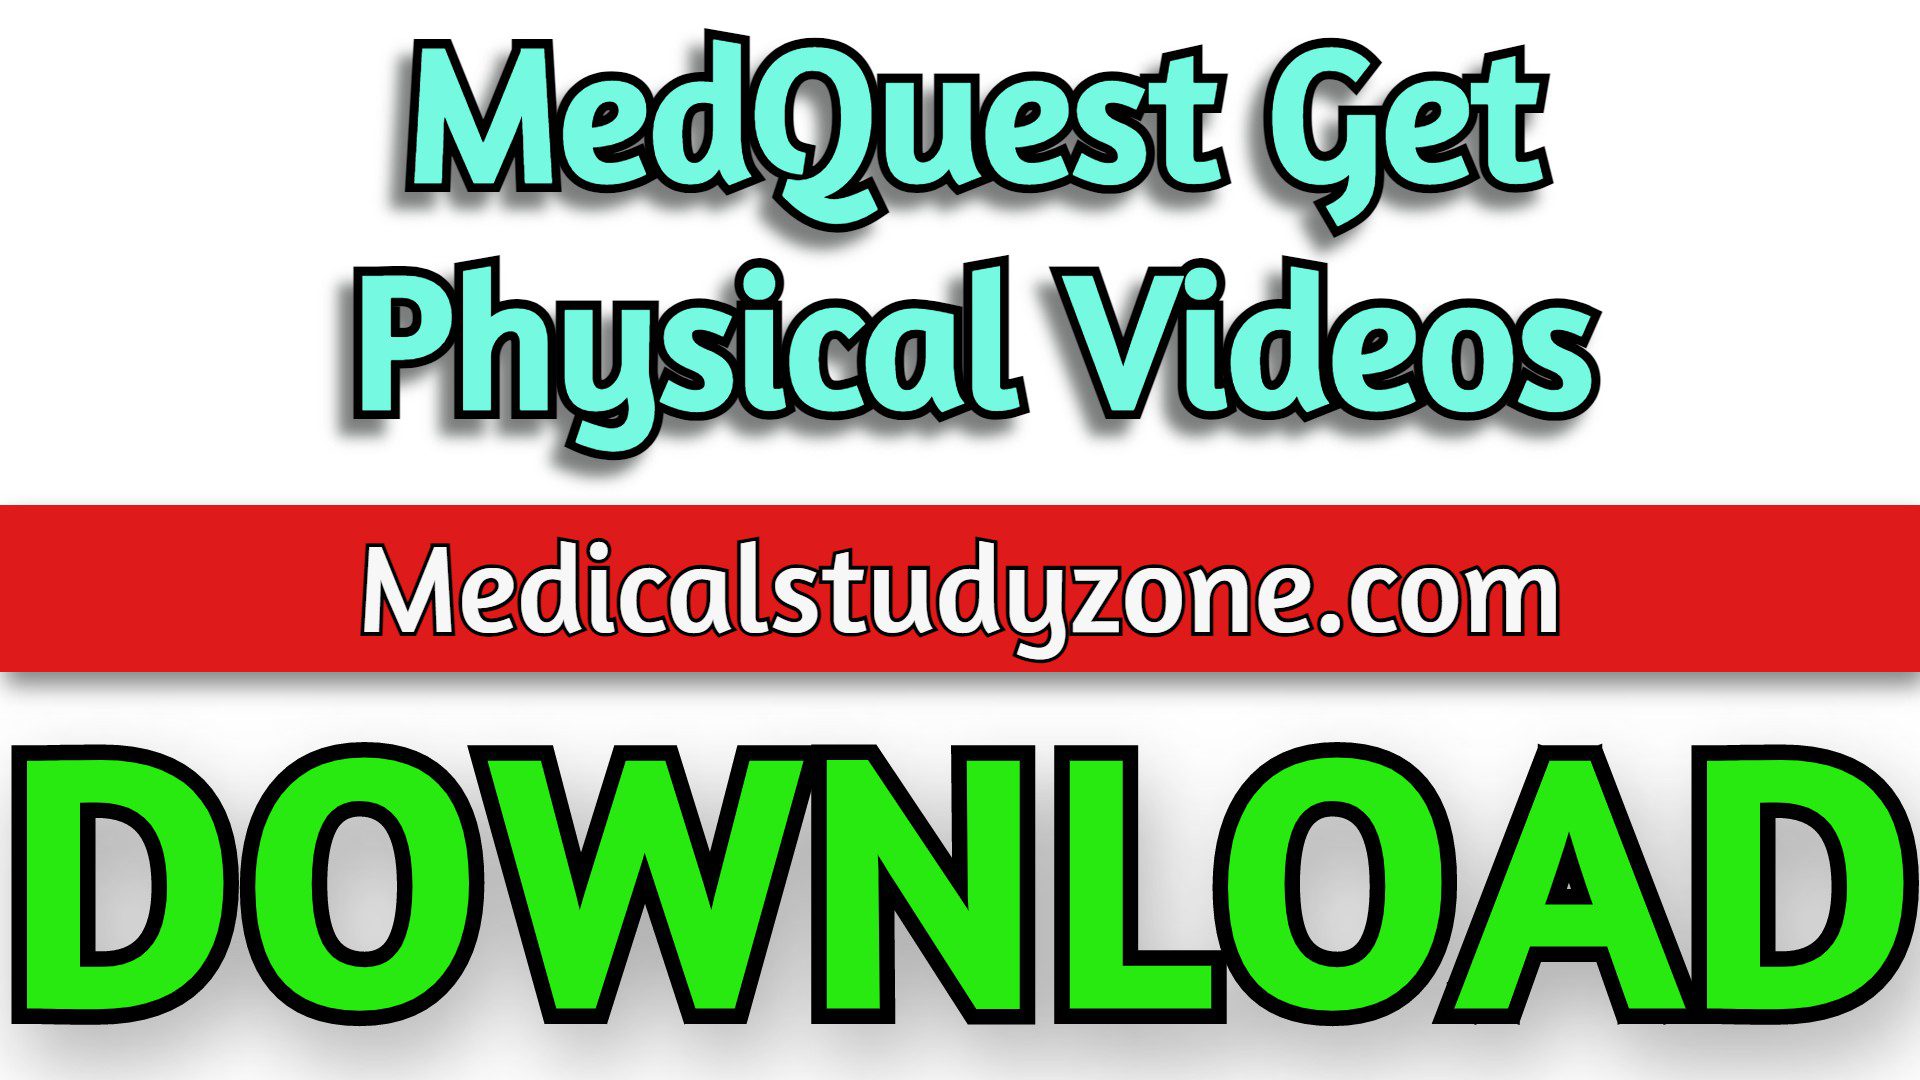 MedQuest Get Physical Videos 2021 Free Download